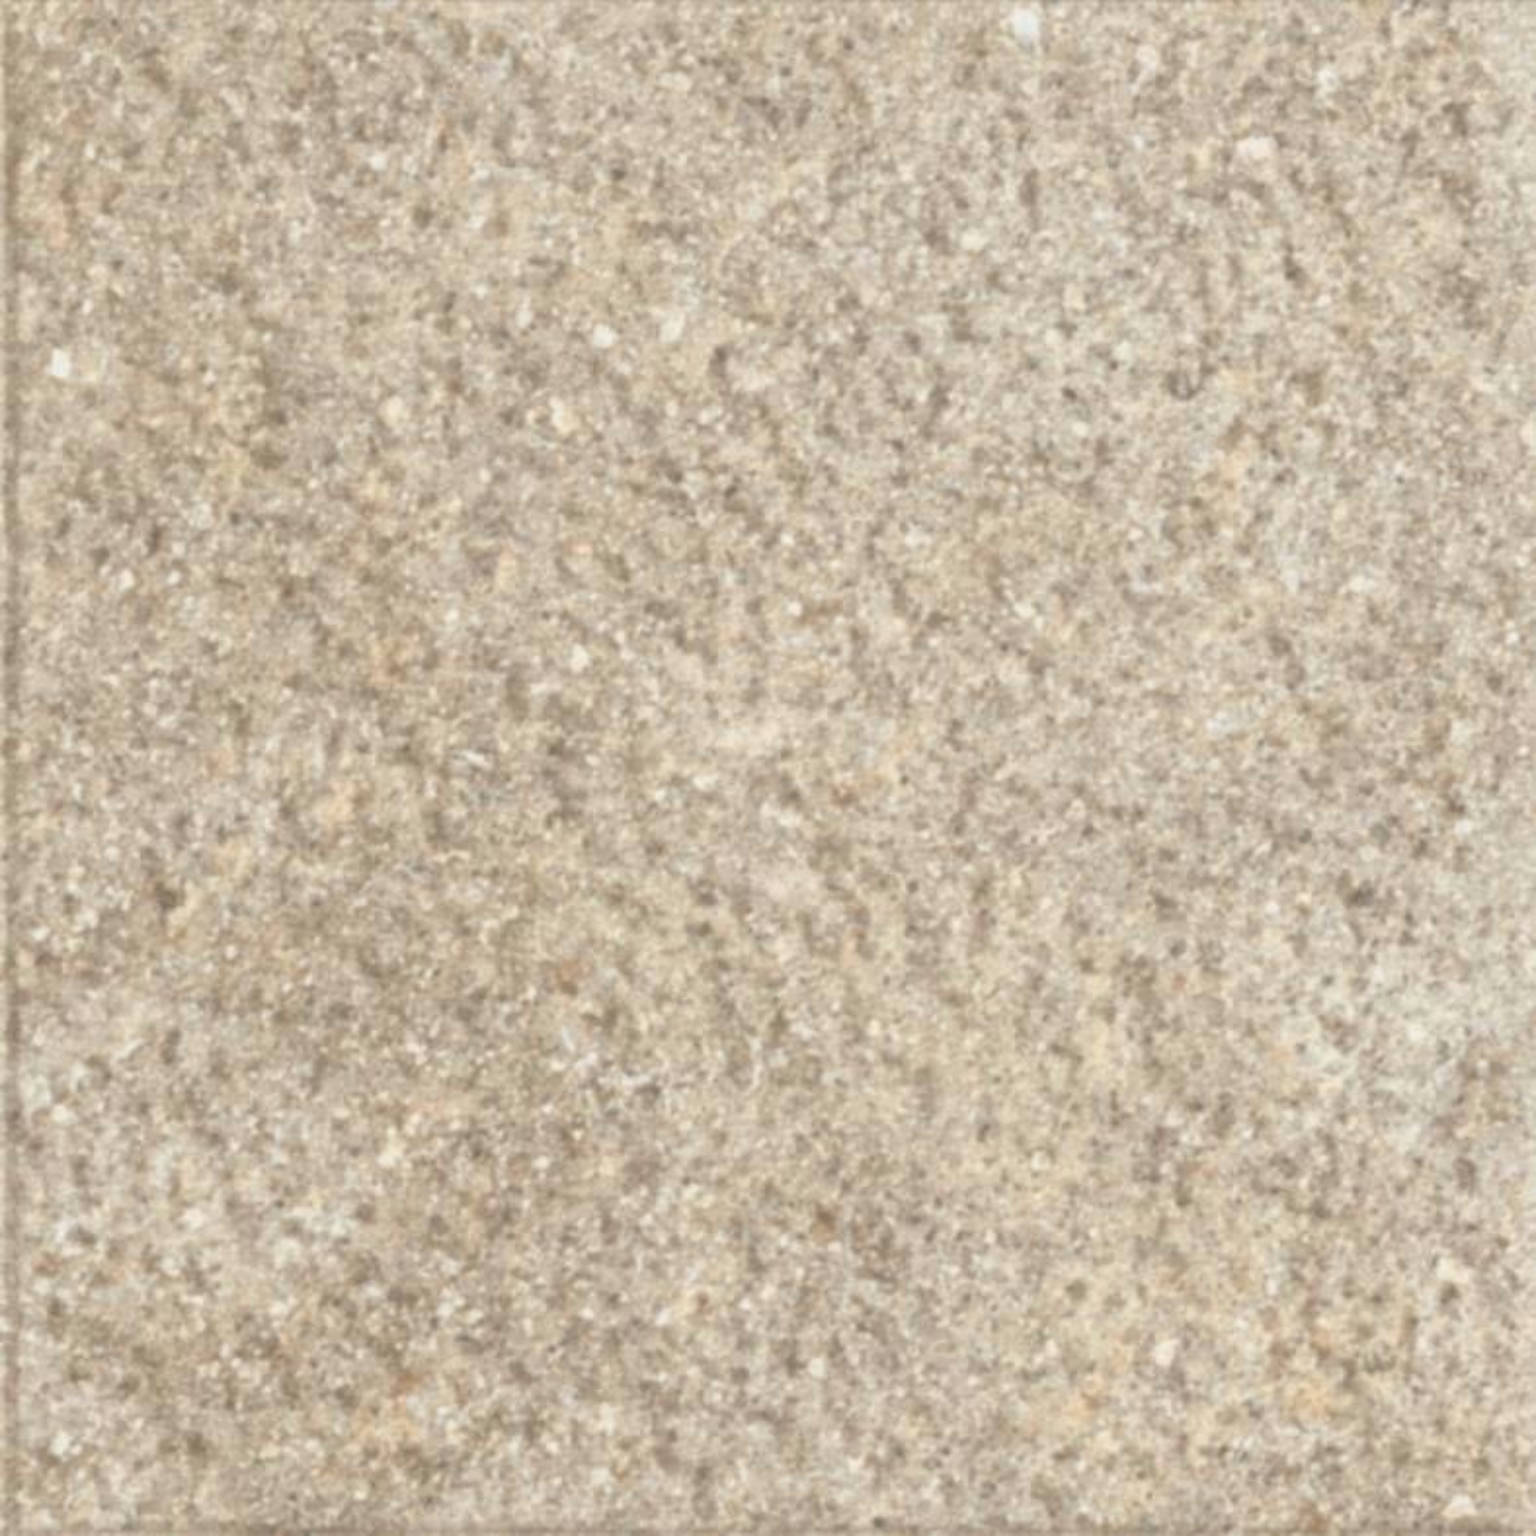 Porfido Beige Texture | Stones & More | Finest selection of Mosaics, Glass, Tile and Stone